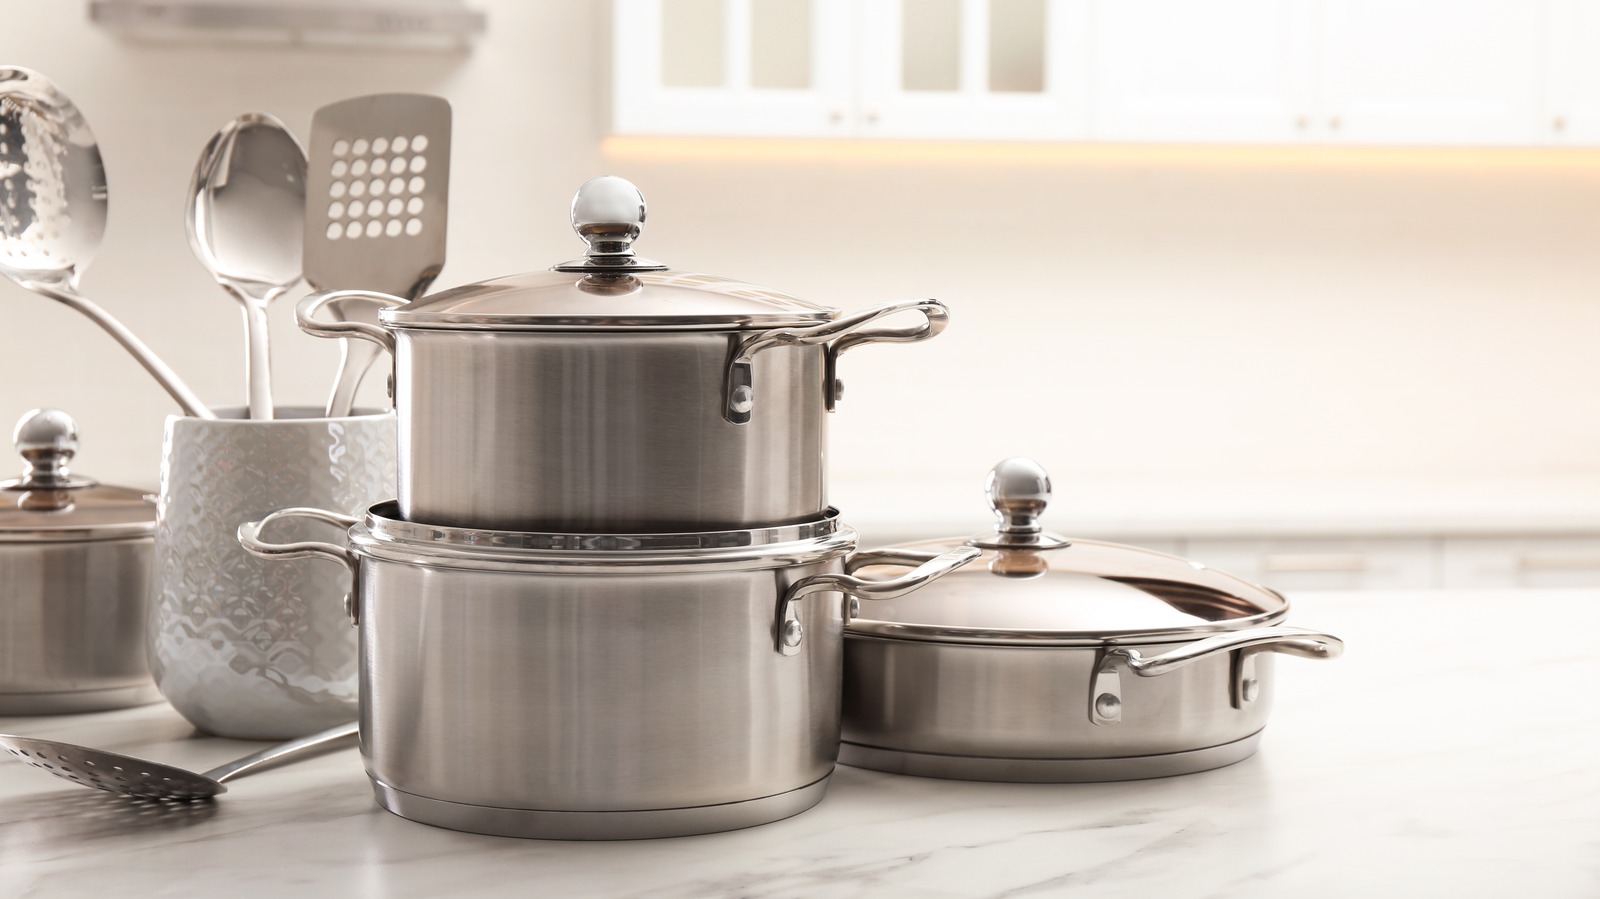 https://www.foodrepublic.com/img/gallery/the-best-cookware-deals-youll-find-this-amazon-prime-day/l-intro-1689106116.jpg